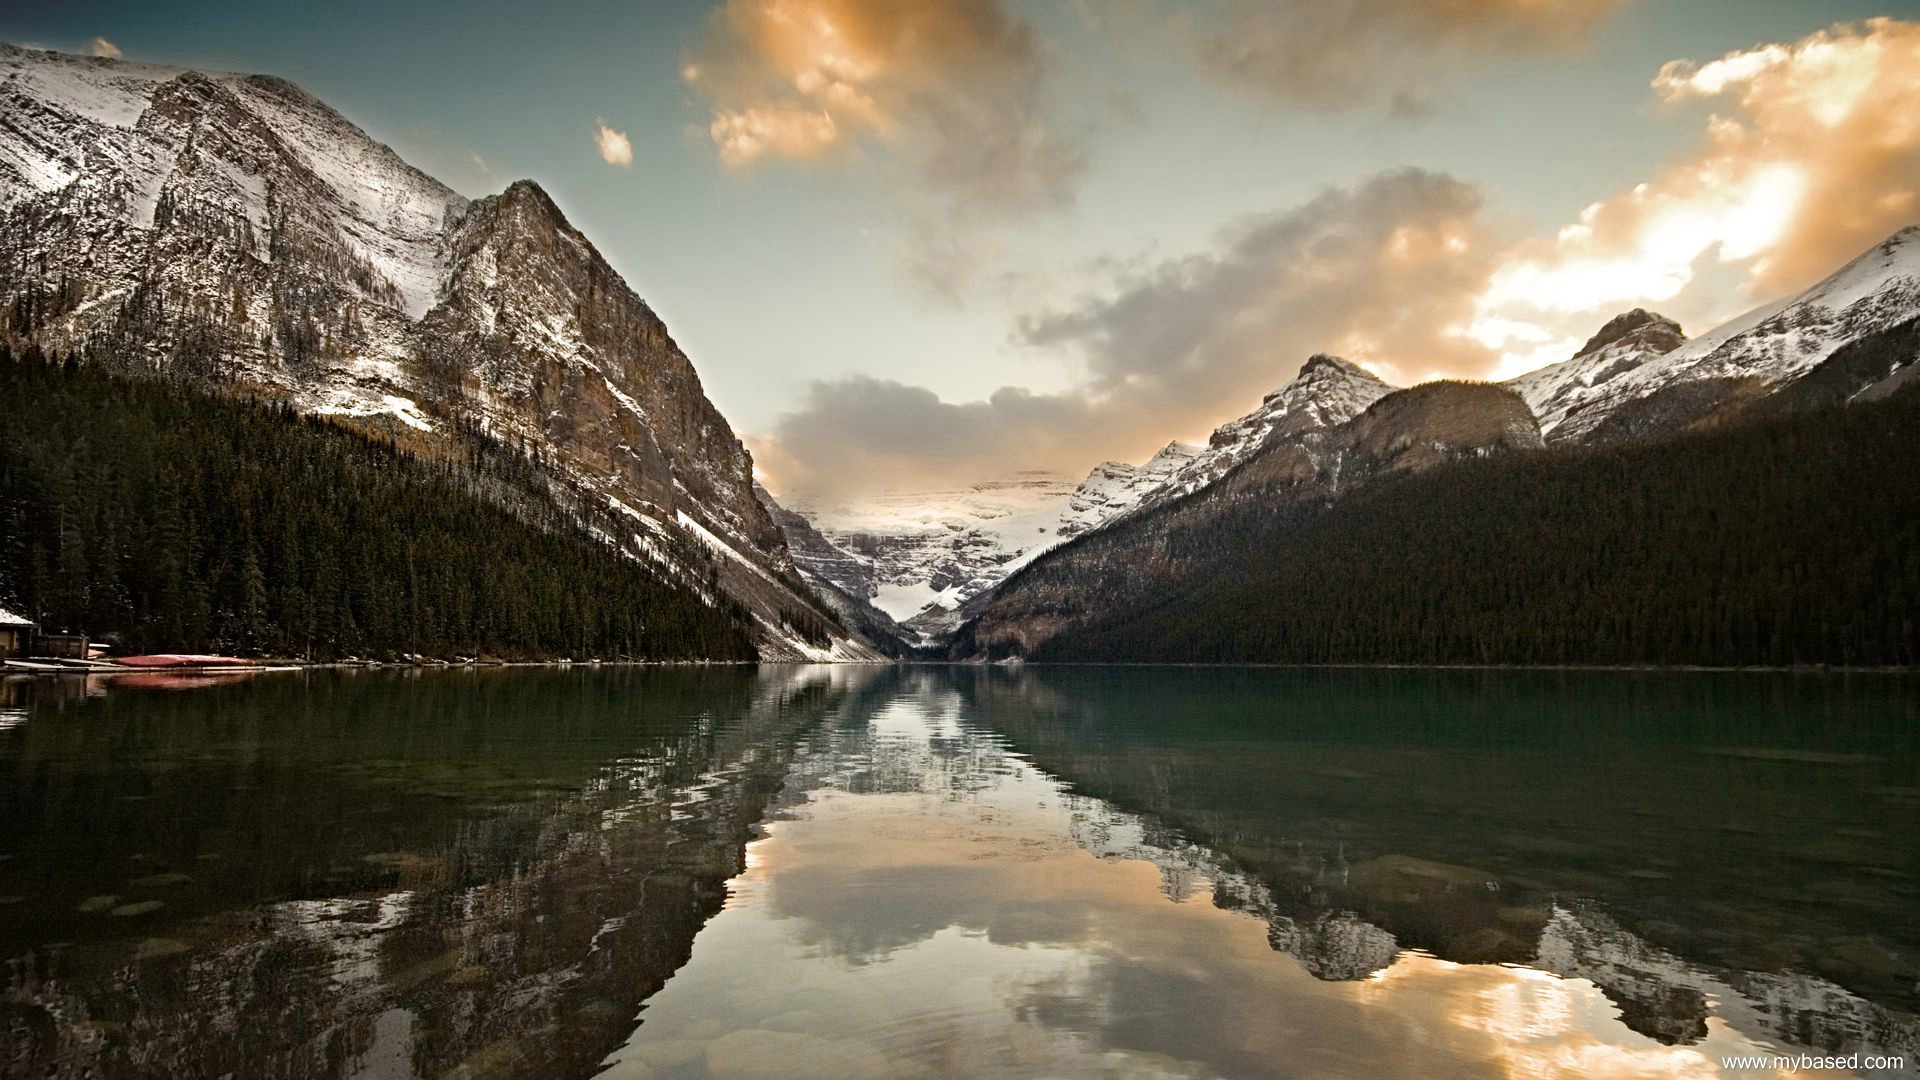 Mountains Lake Snow Lake Louise Canada Lake Landscape Nature Water Nature Landscape Clouds Mountains 1920x1080